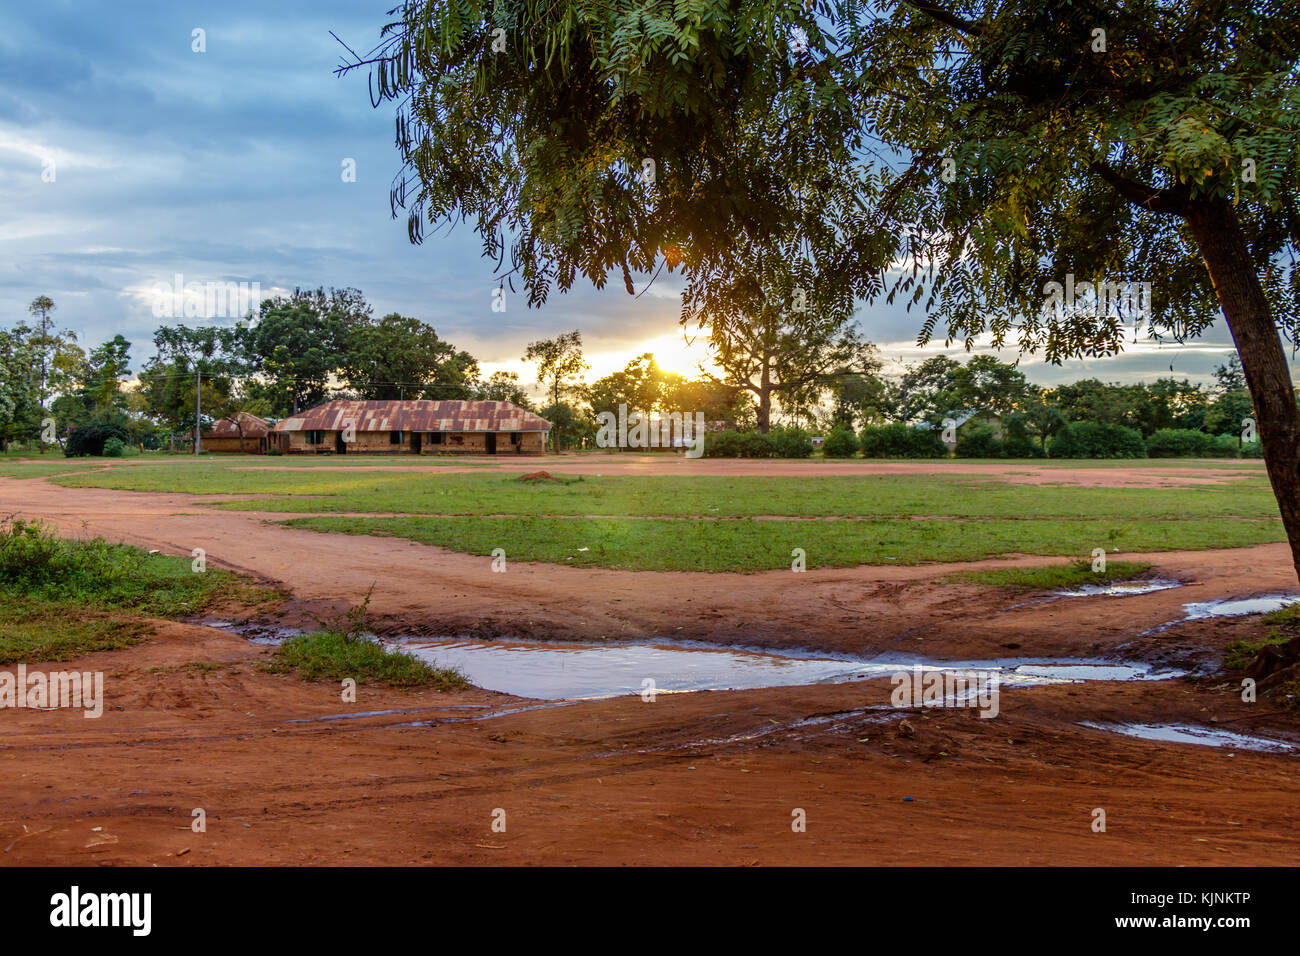 Sunset after a heavy shower in Mbale Uganda. Looking at the local soccer field with the primary school in the background. Stock Photo